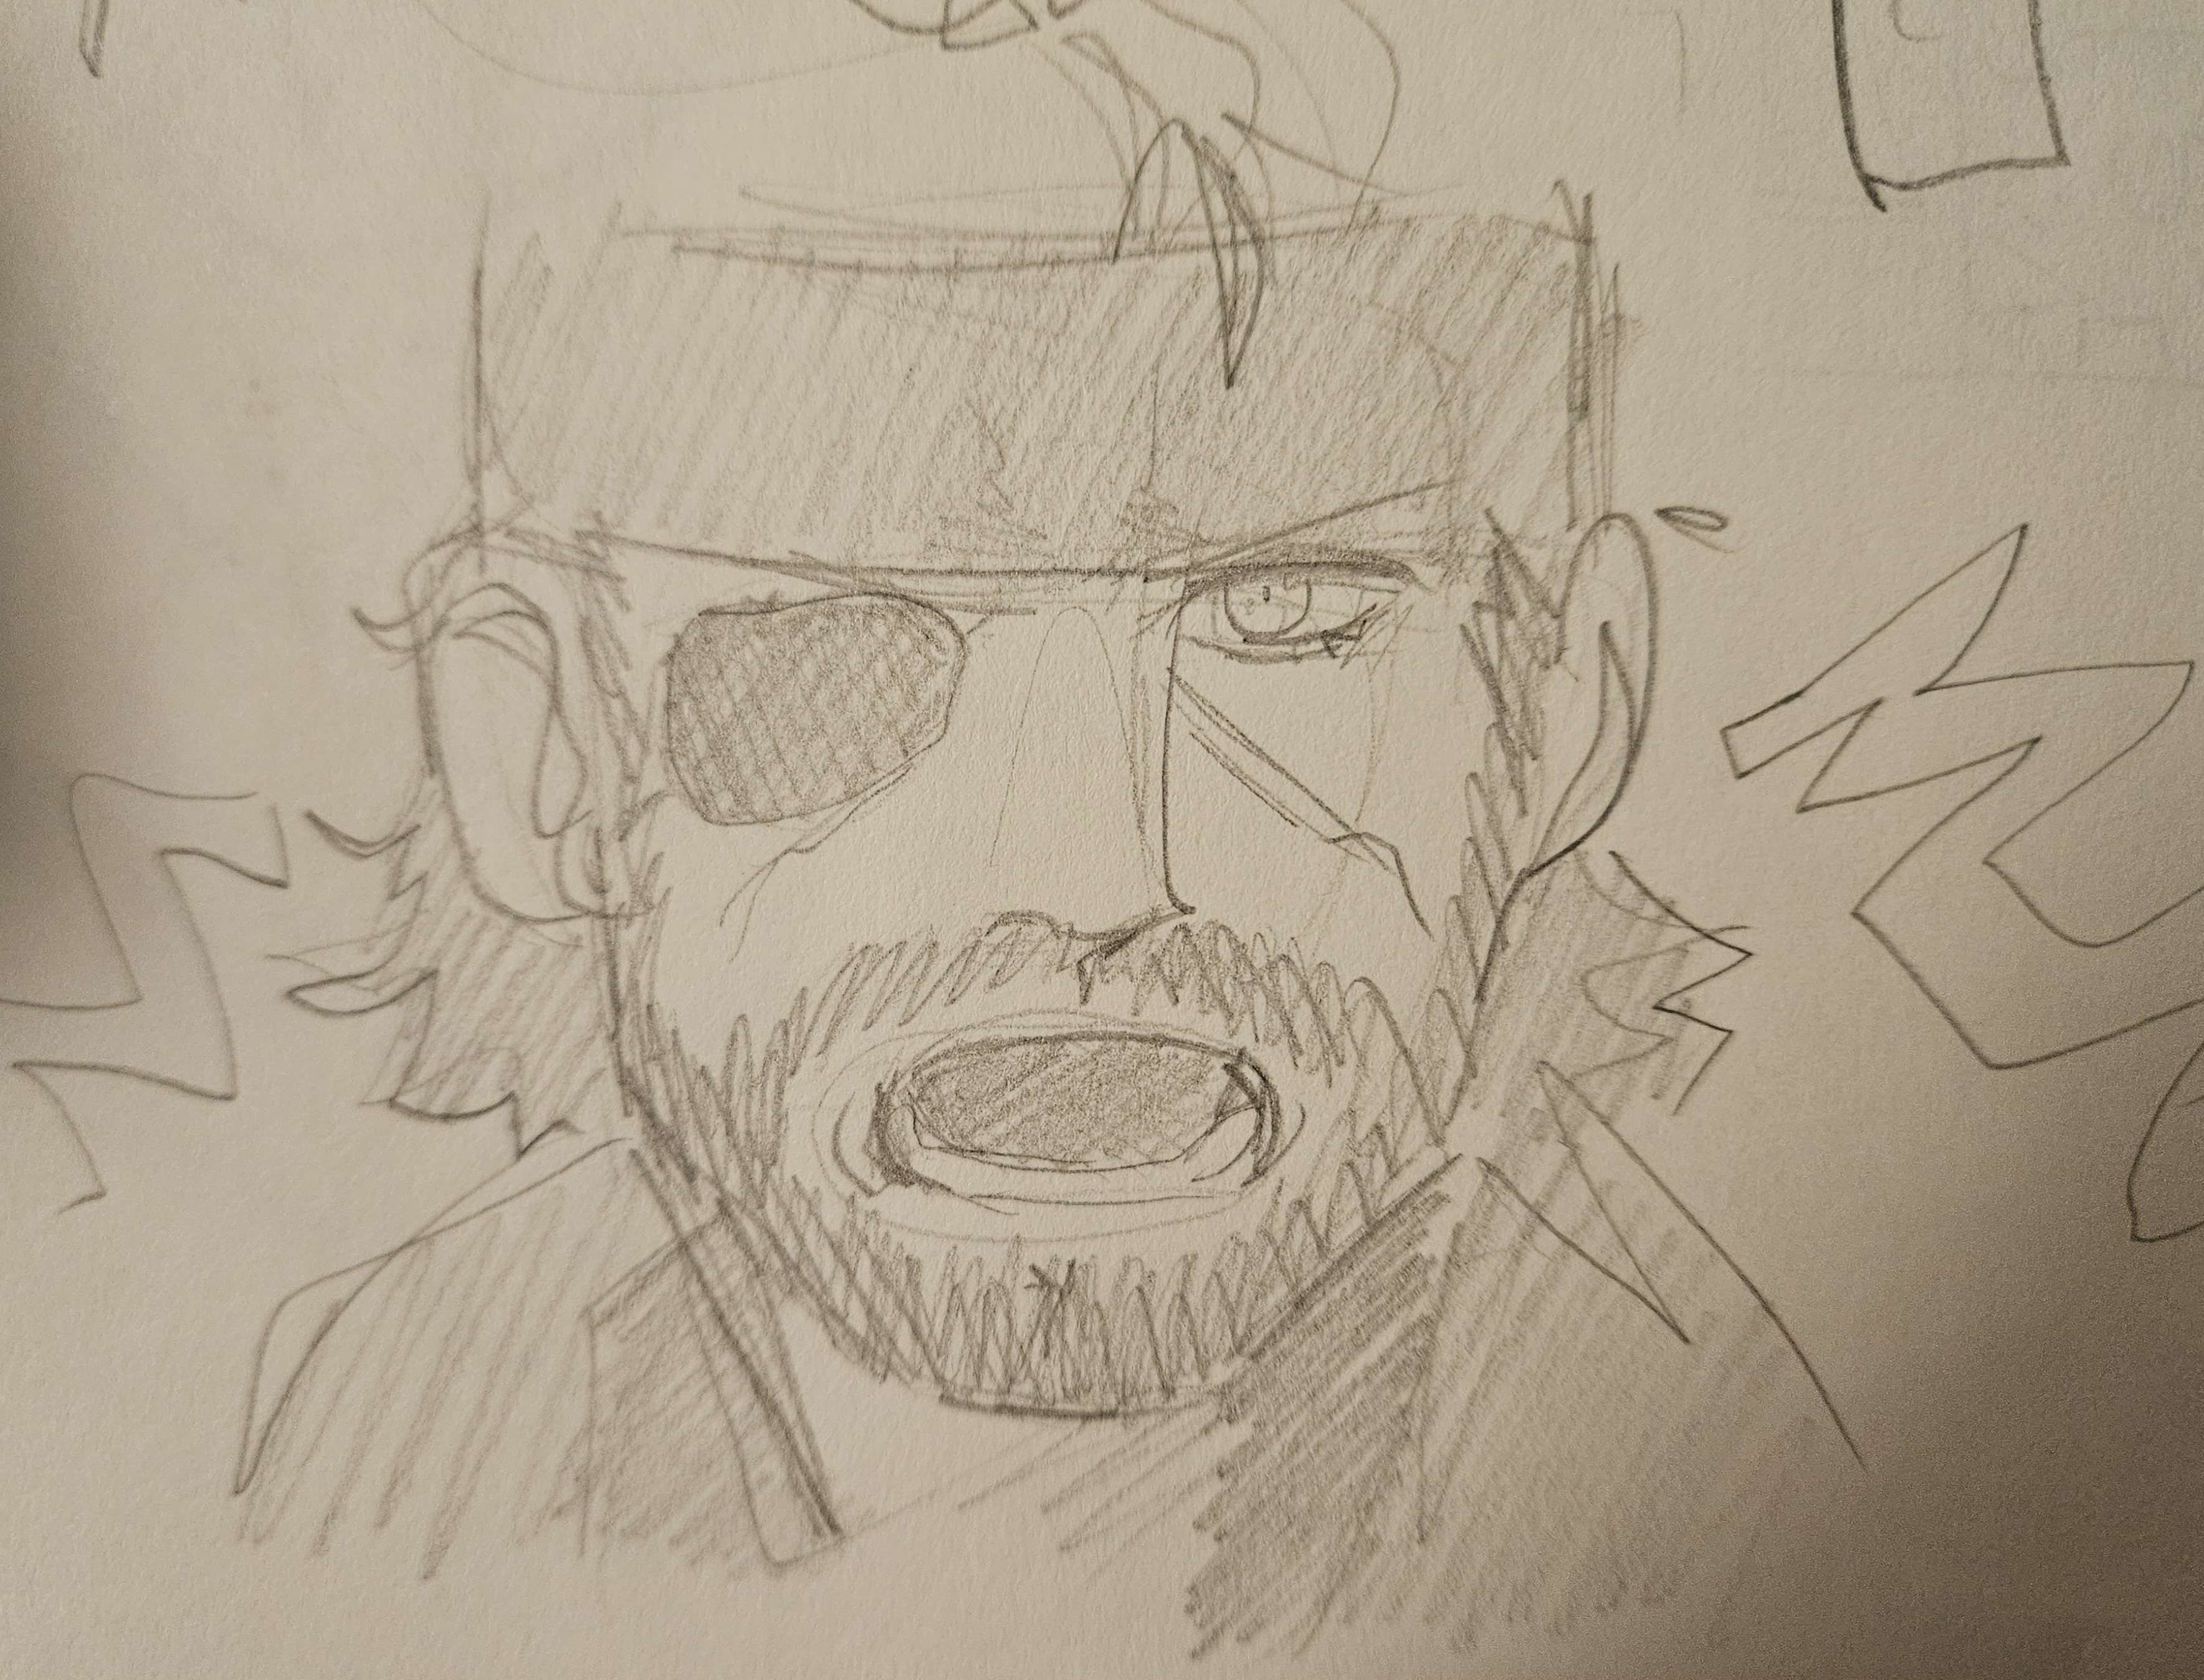 Sketchbook drawing of that one screenshot of Big Boss screaming from MGS3. You know the one'